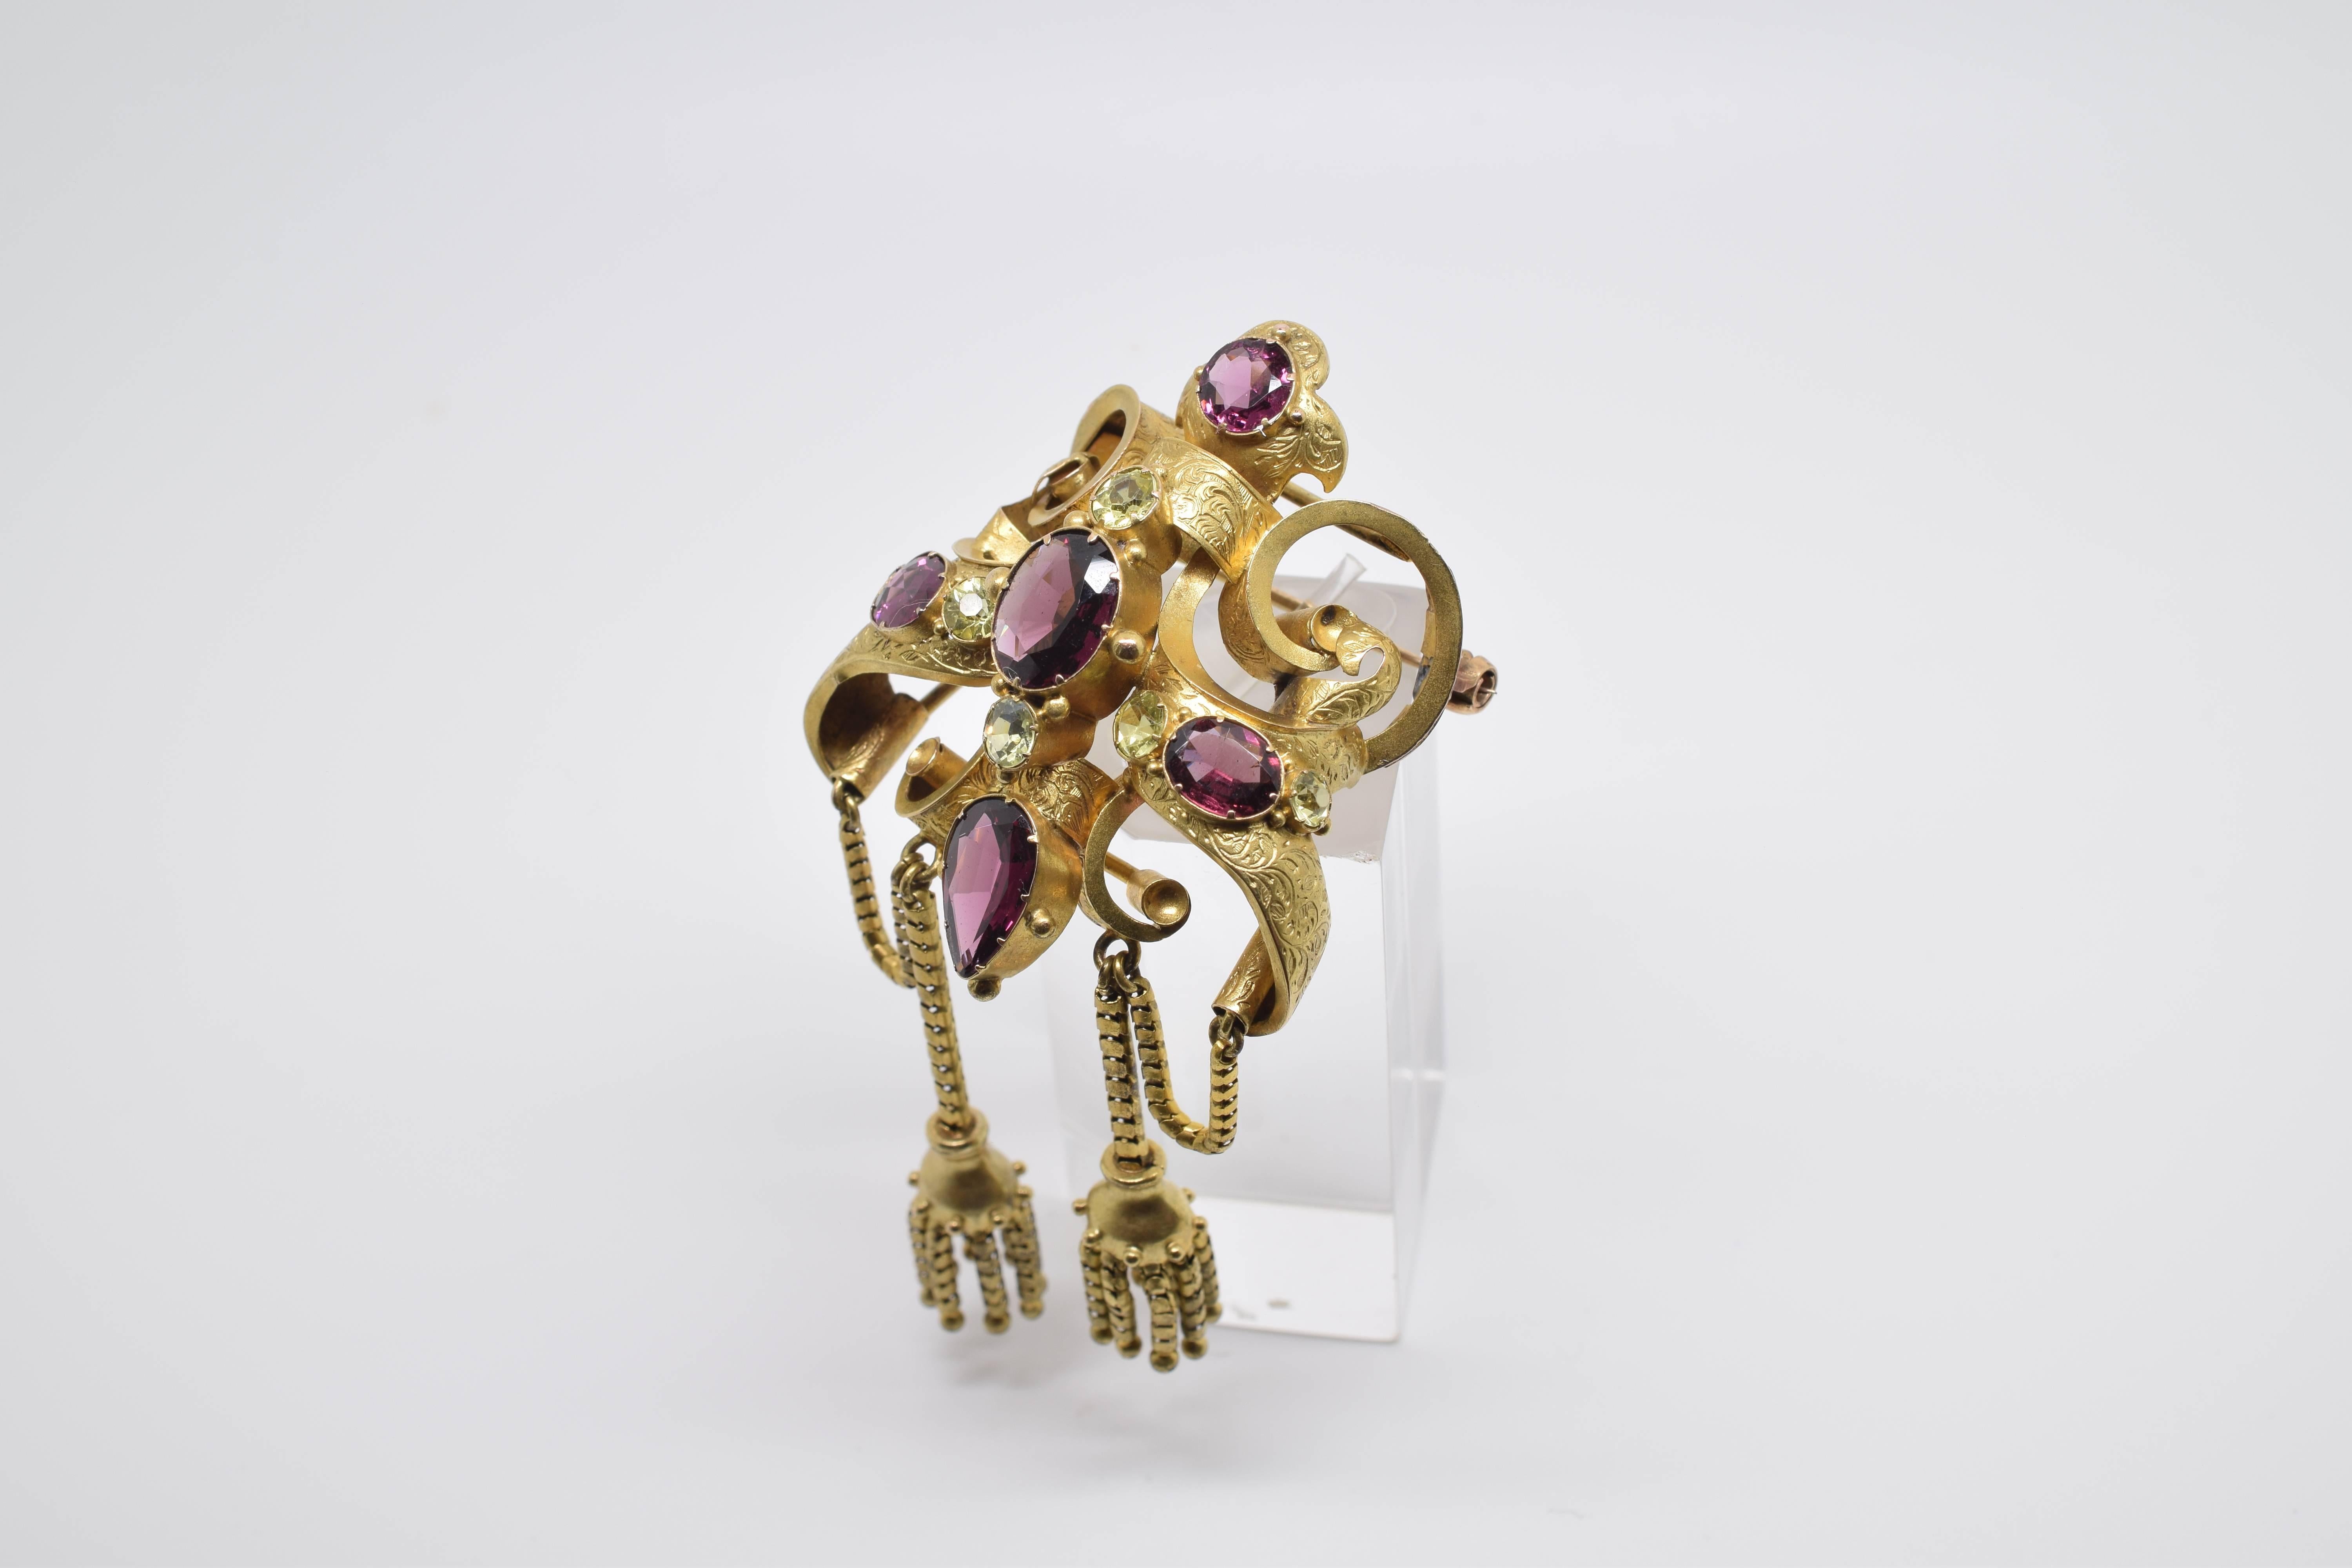 18-carat gold brooch with and ellegant symmetrical composition based on loops and scrolls with a fine decoration in high relief of vegetal elements with slight resemblance to neoclassic pieces. In the top, a circular faceted garnet is presented,